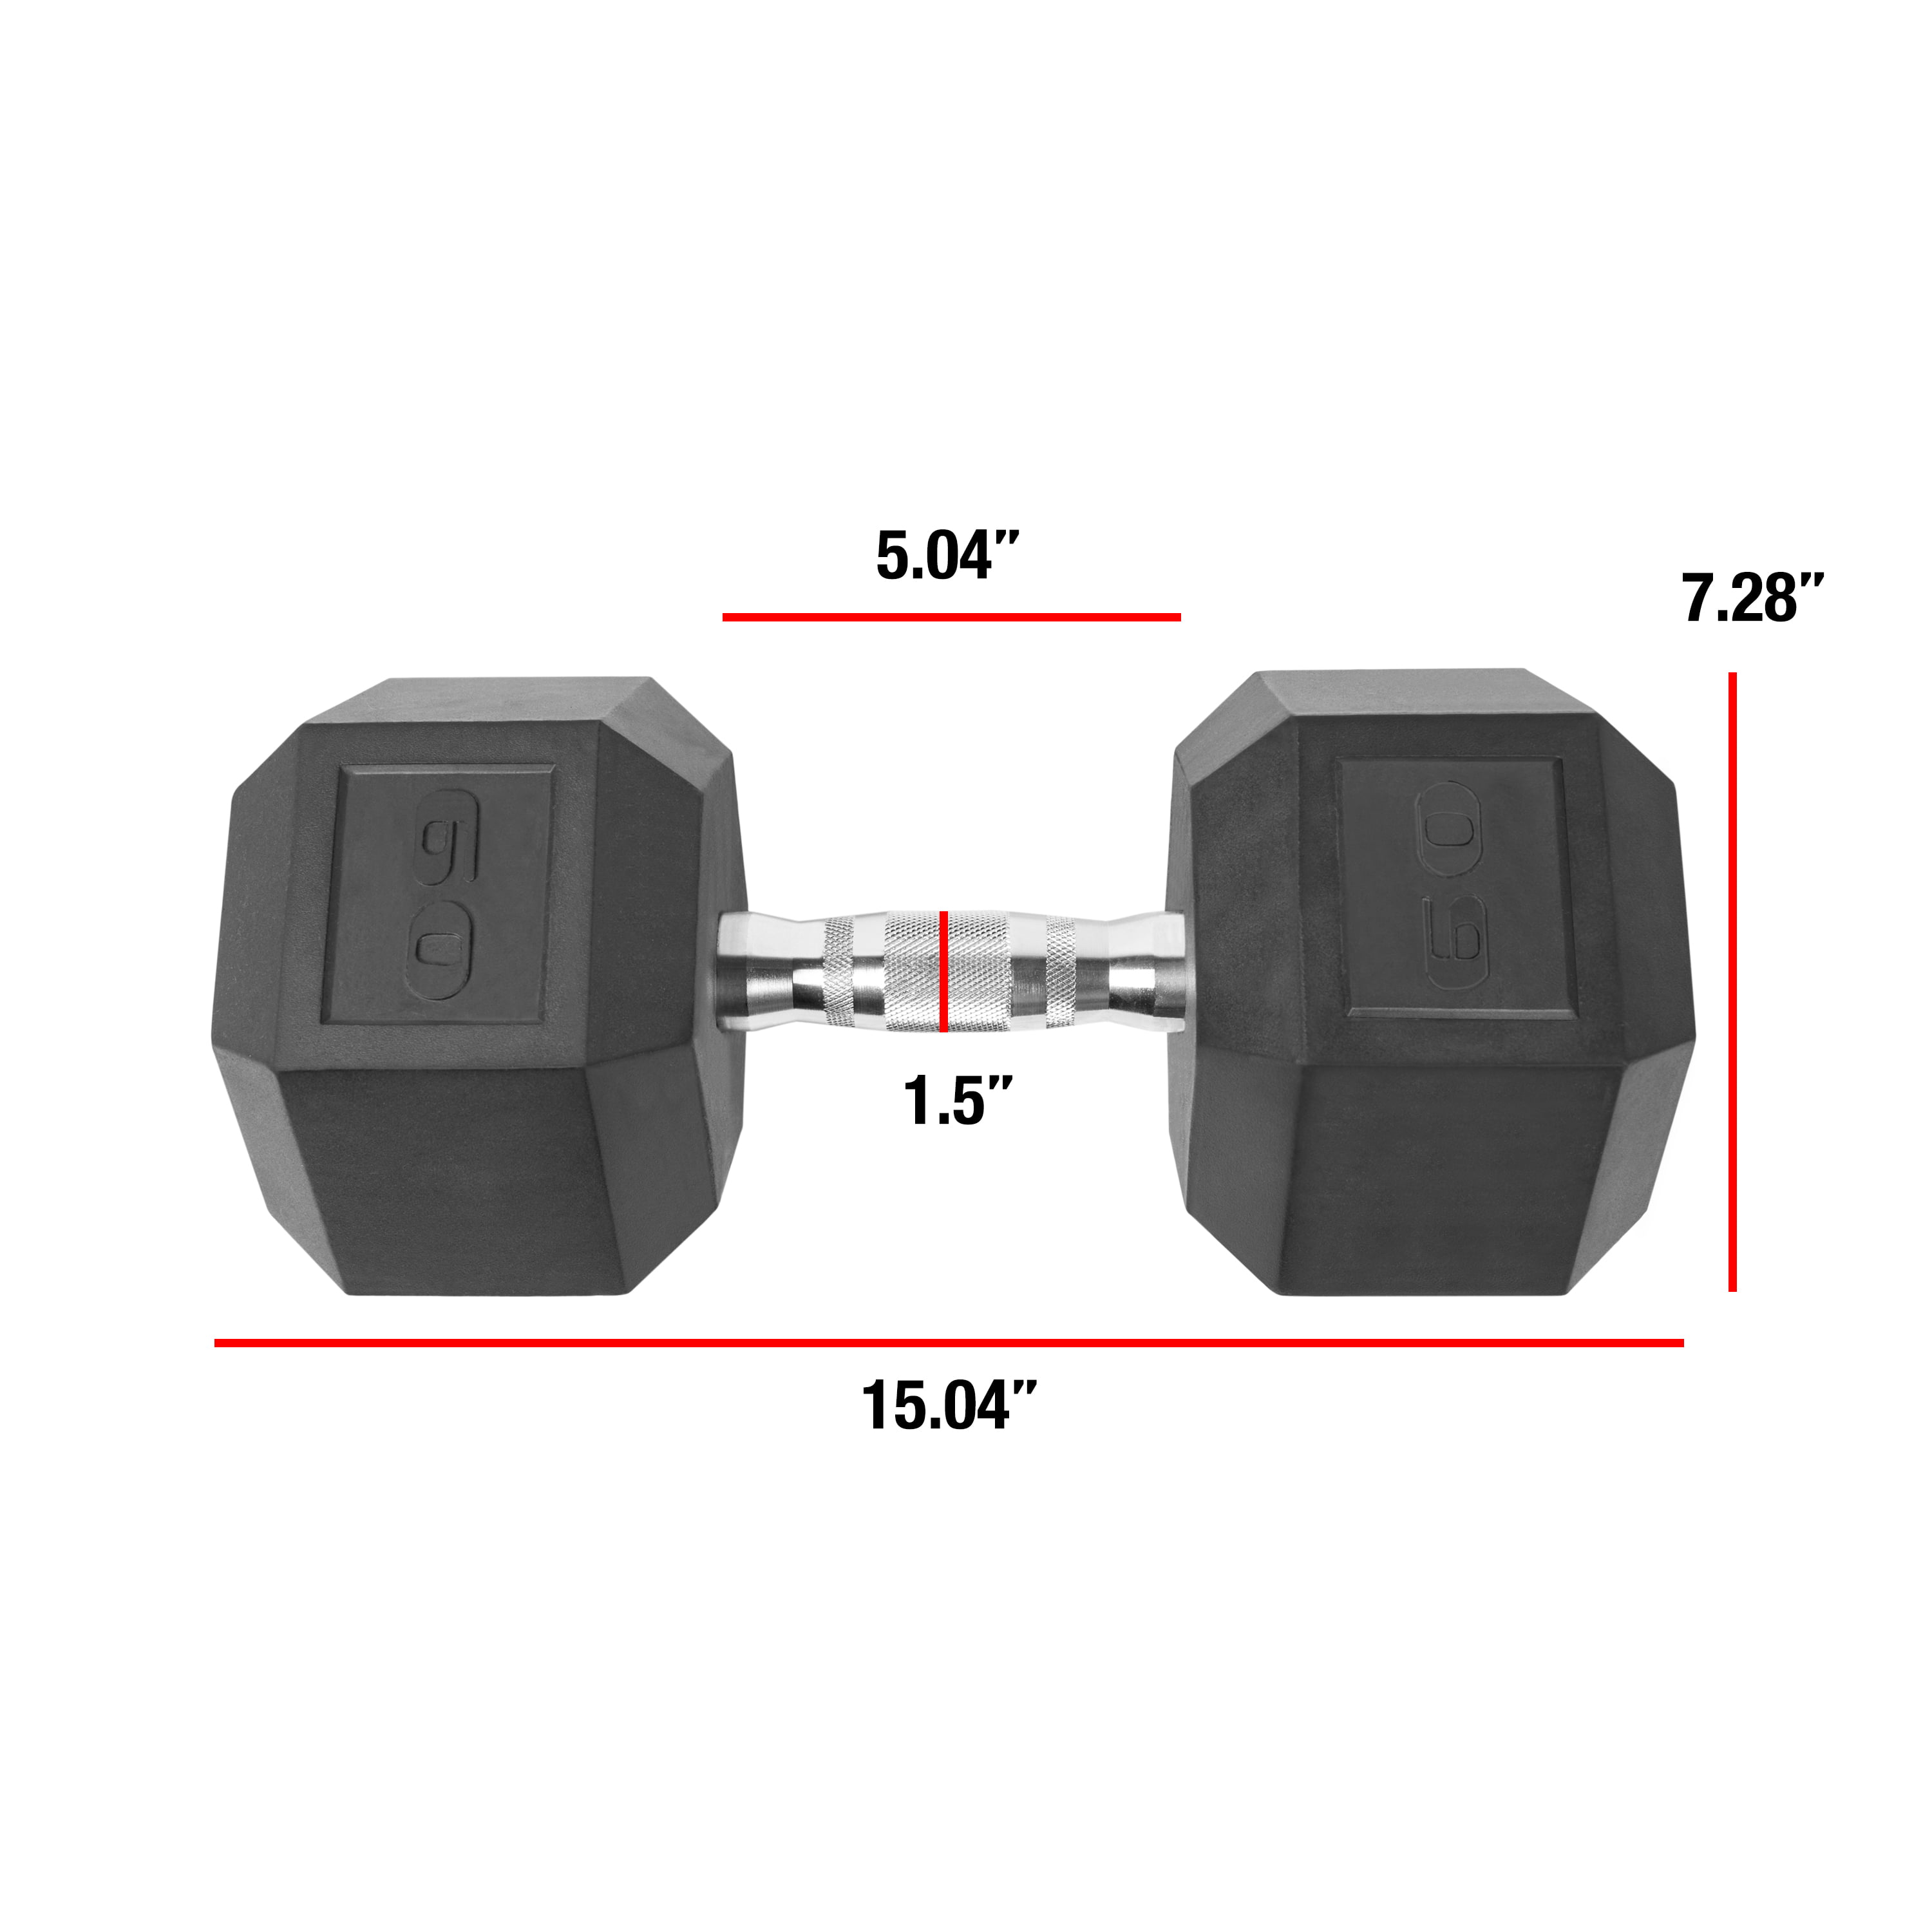 CAP Dumbbell TWO 30 LB weights Brand New Fast Shipping 60 Lb Set 